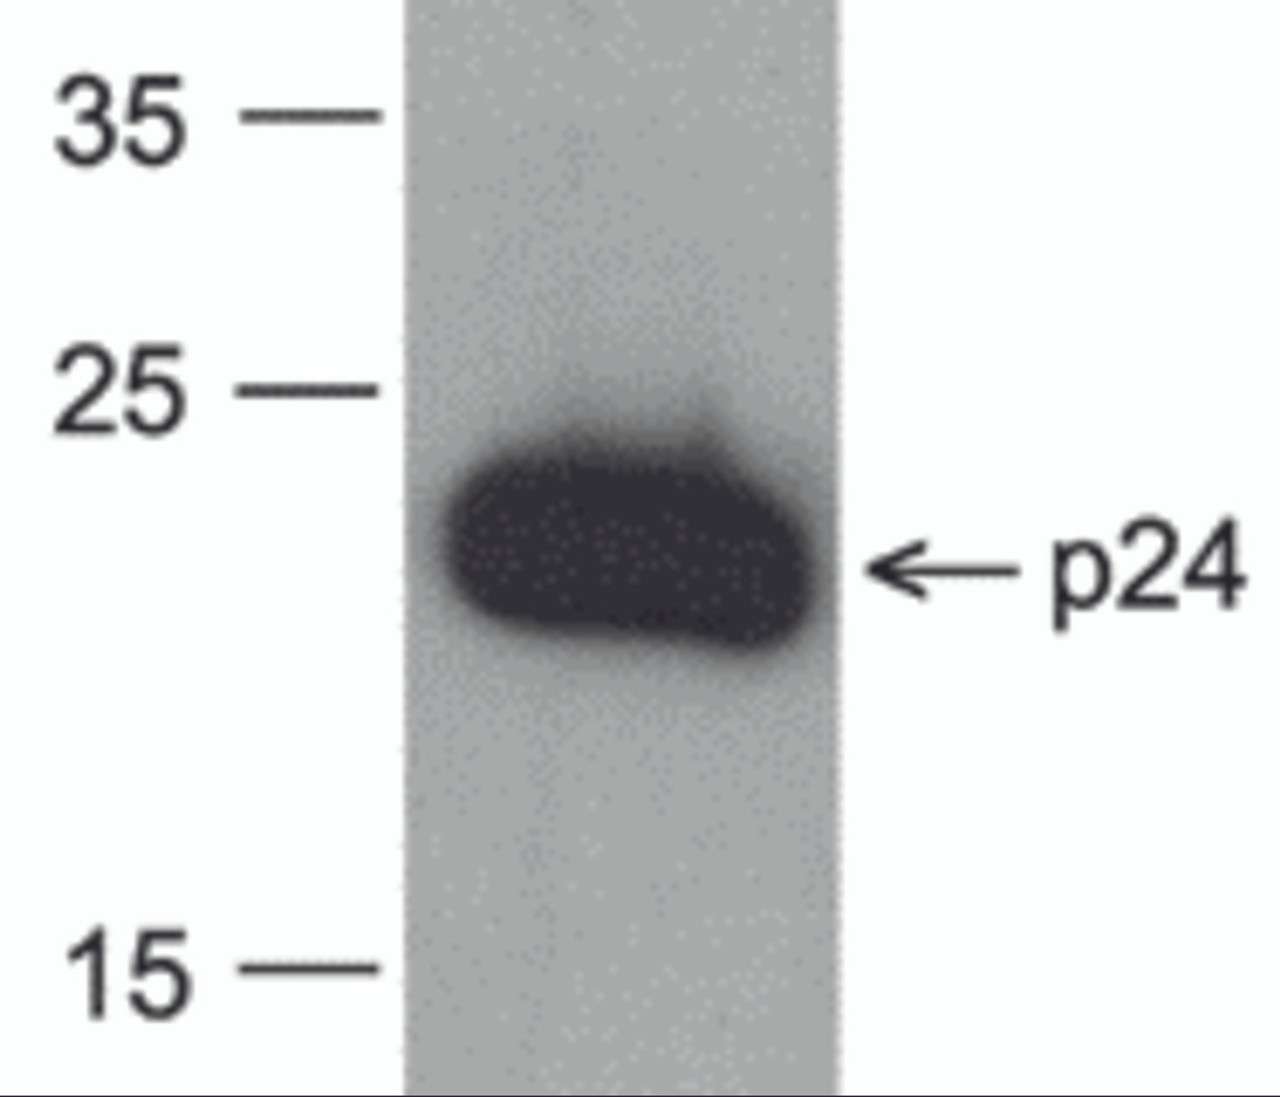 Western blot analysis of 20 ng of recombinant HIV-1 p24 protein with PM-6335-biotin at 0.2 &#956;g/mL.